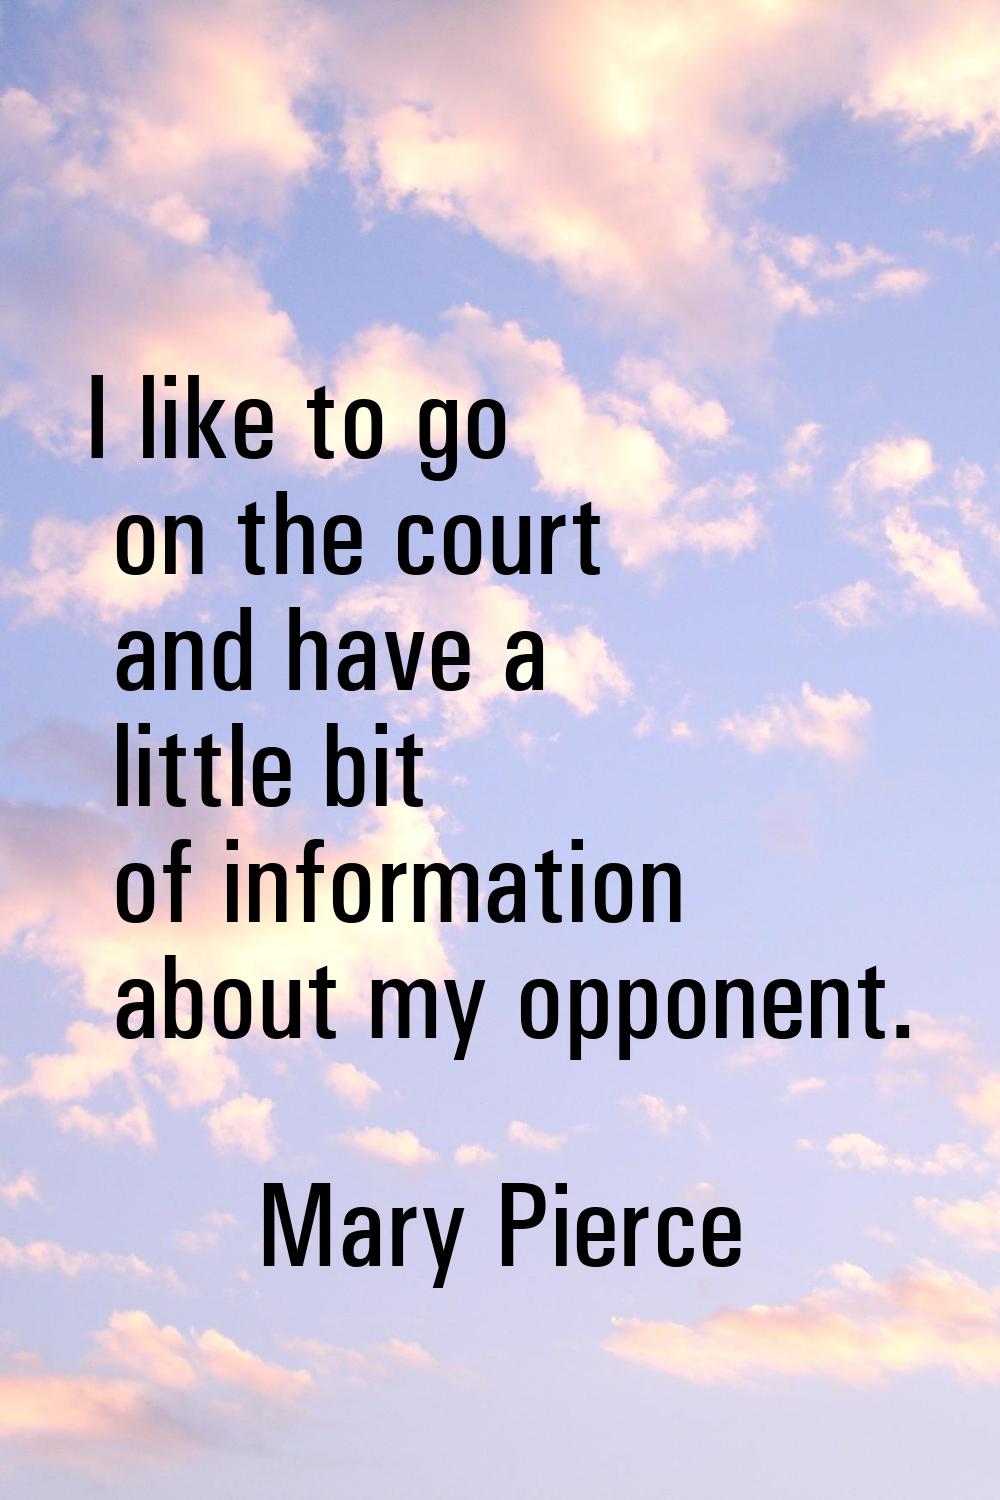 I like to go on the court and have a little bit of information about my opponent.